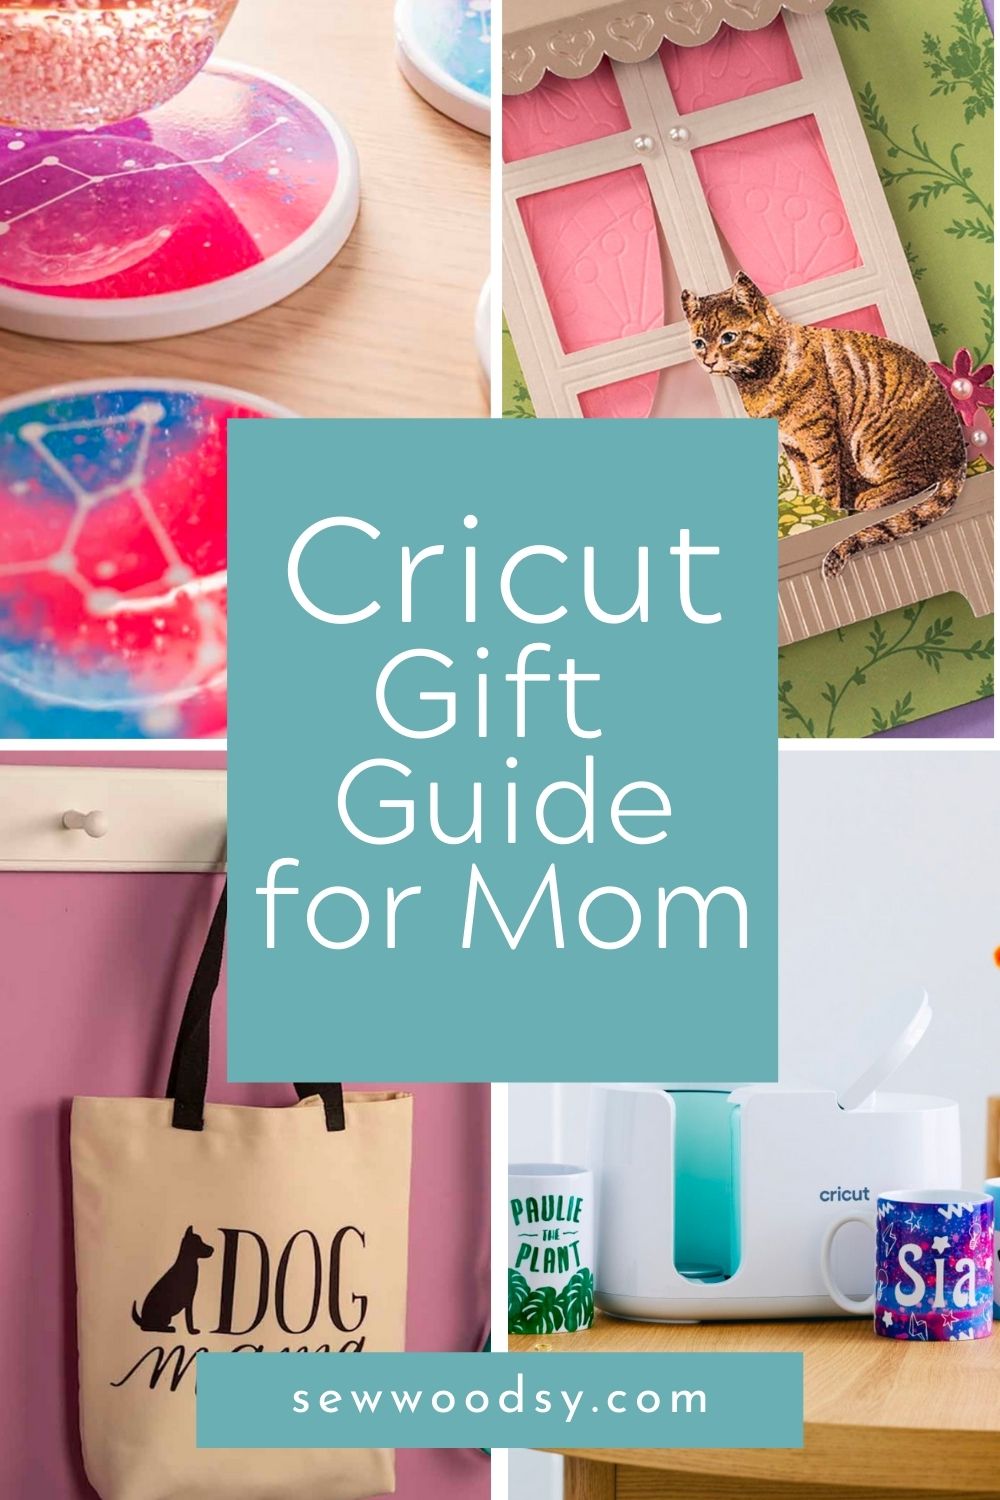 https://sewwoodsy.com/wp-content/uploads/2021/05/Cricut-Gift-Guide-for-Crafty-mom.jpg